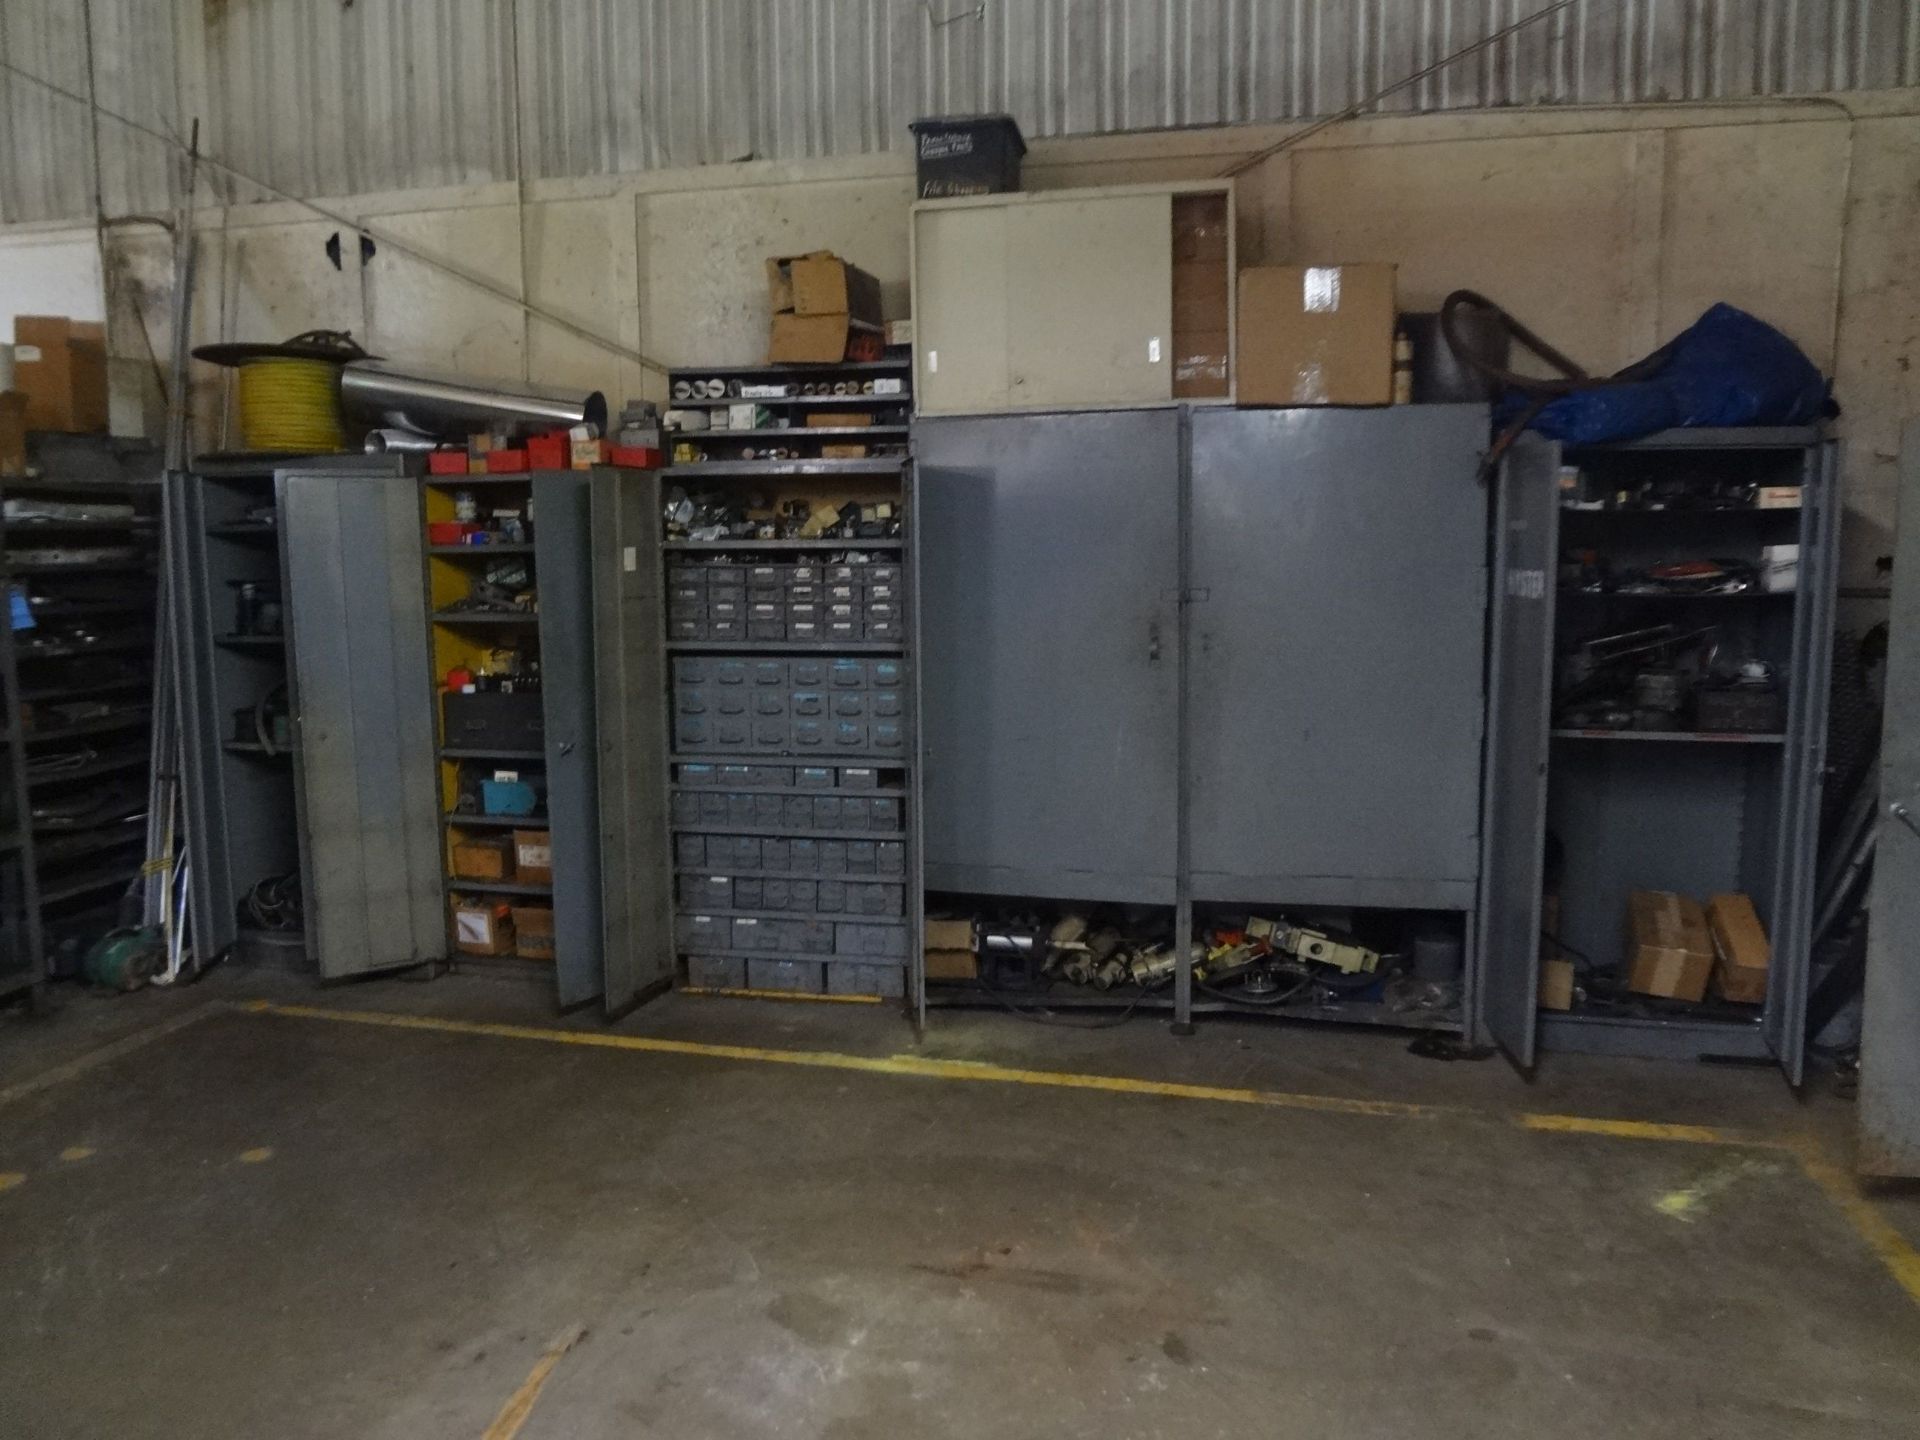 2-DOOR STEEL CABINET WITH CONTETNS INCLUDING LIFT TRUCK PARTS, MACHINE PARTS, FUSES, ELECTRICAL,